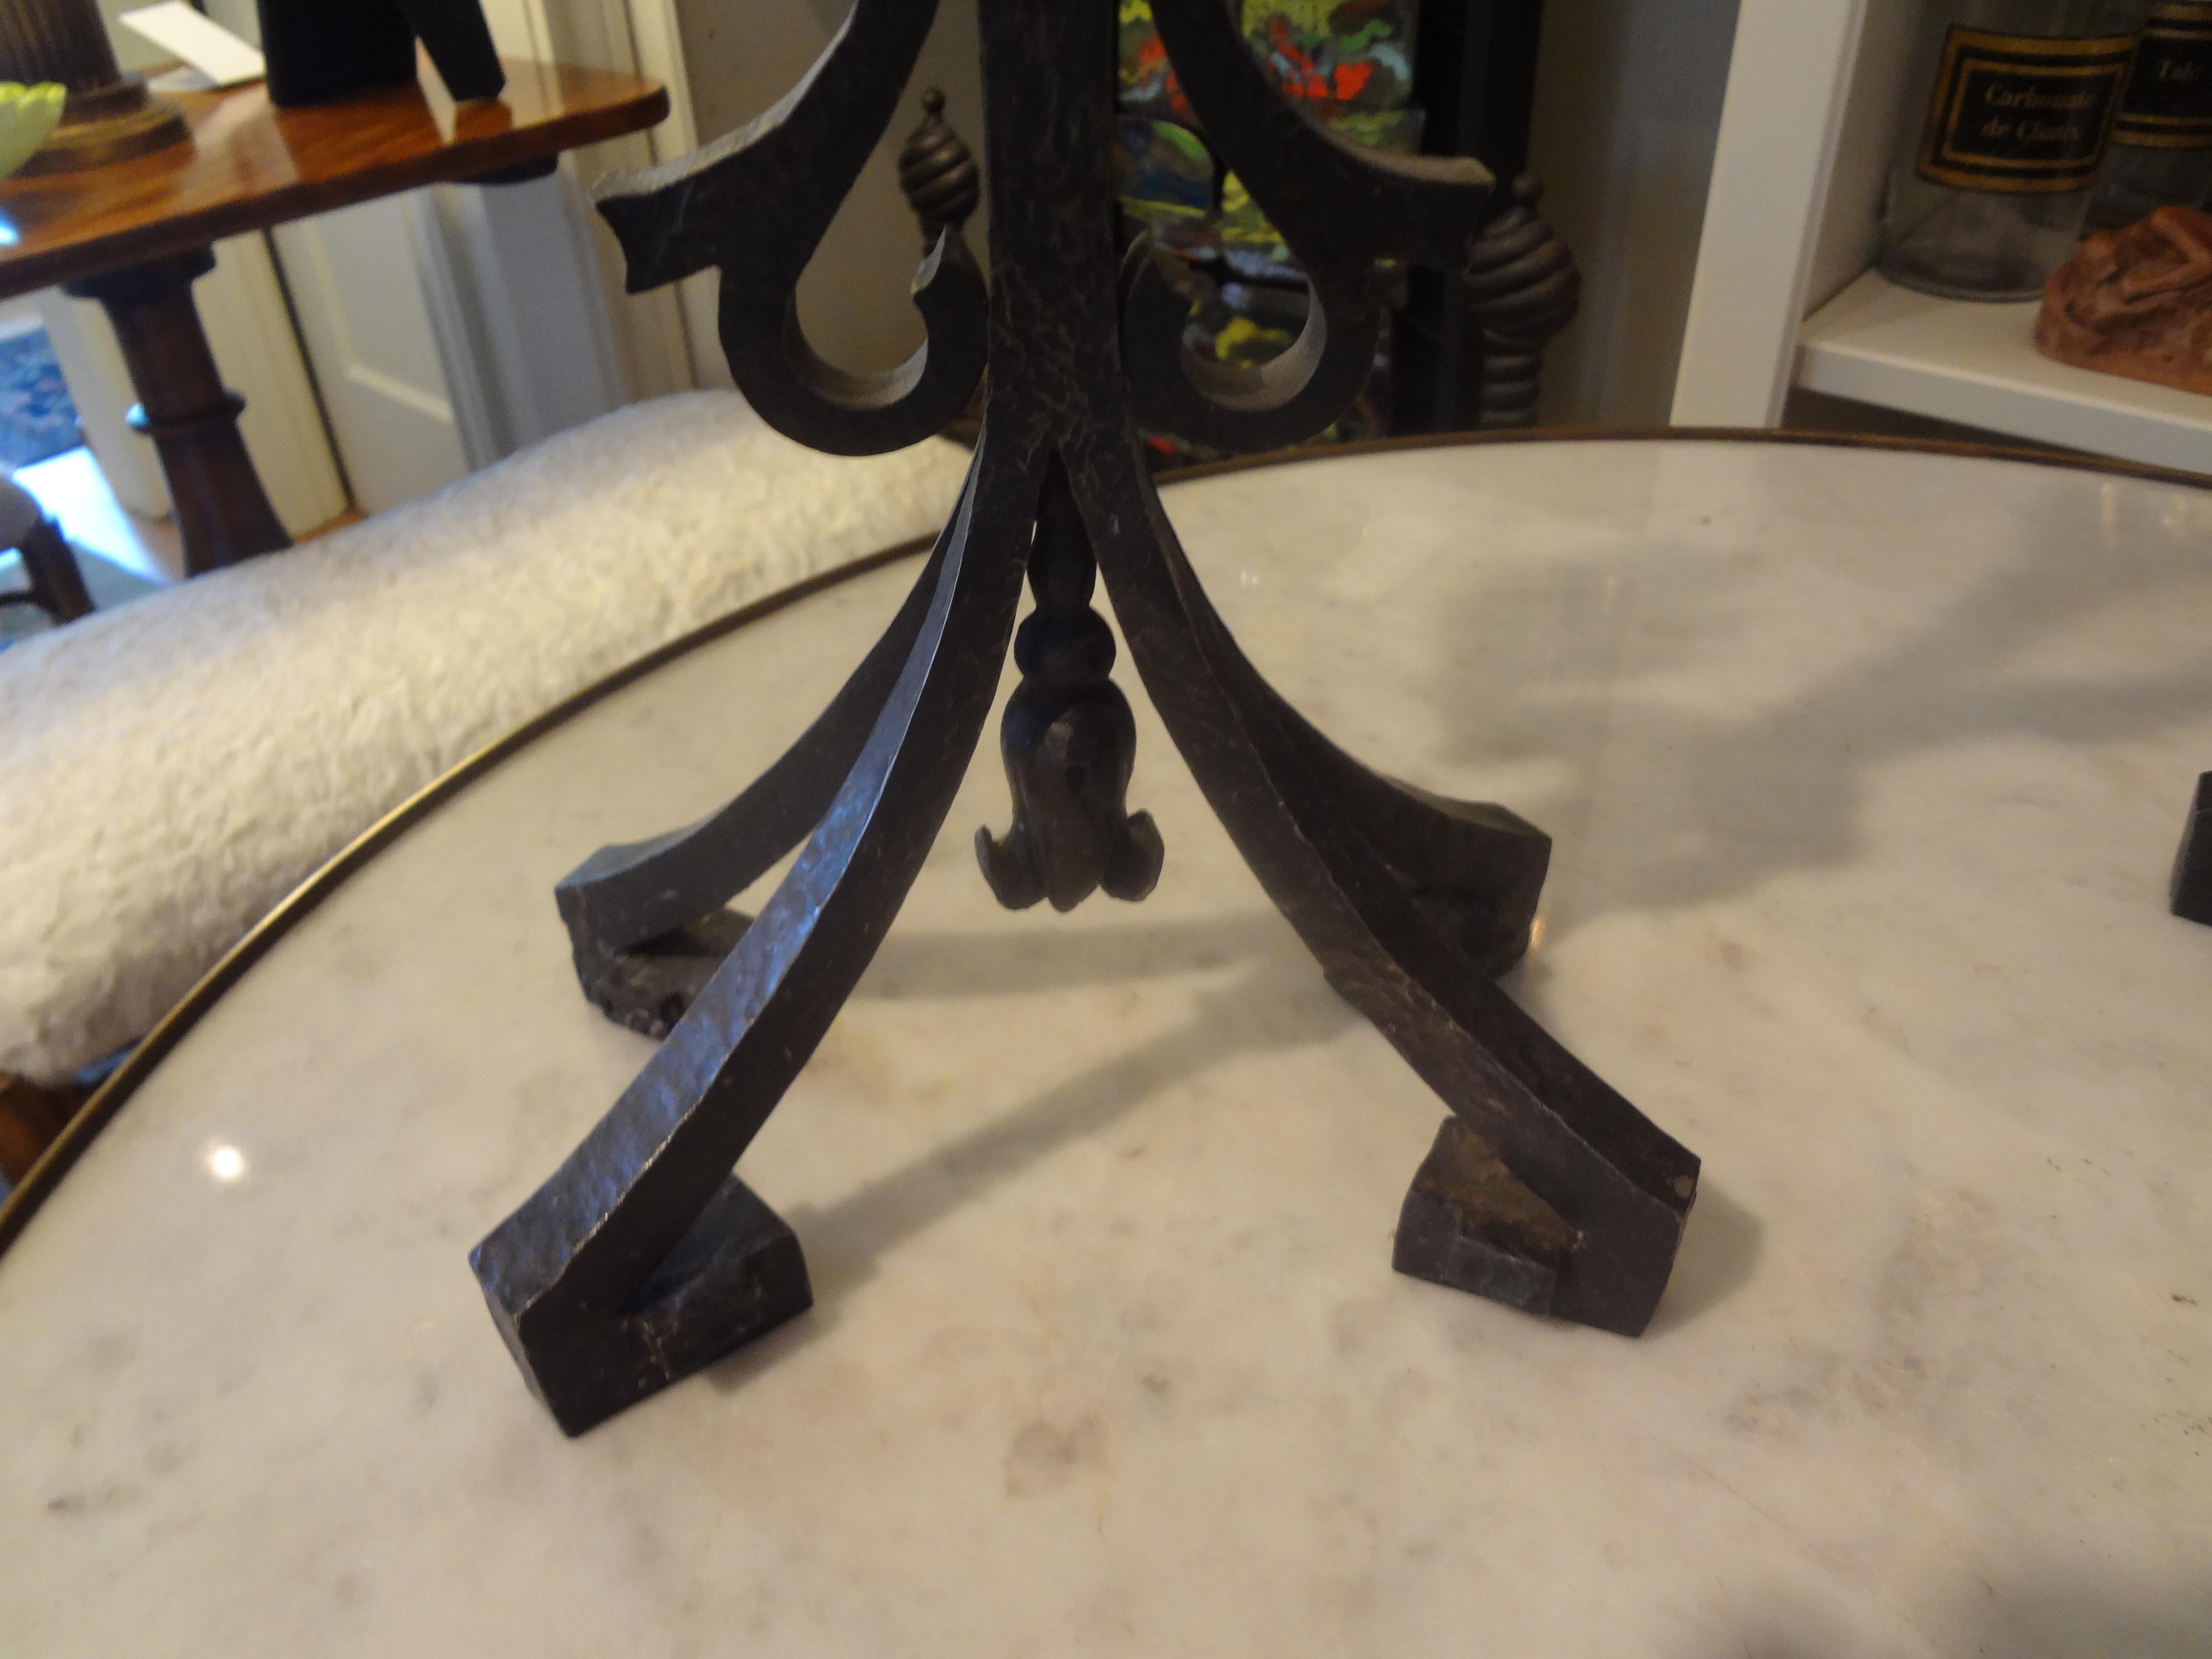 Early 20th Century Pair of French Art Deco Iron Candleholders or Lamps Attributed to Charles Piguet